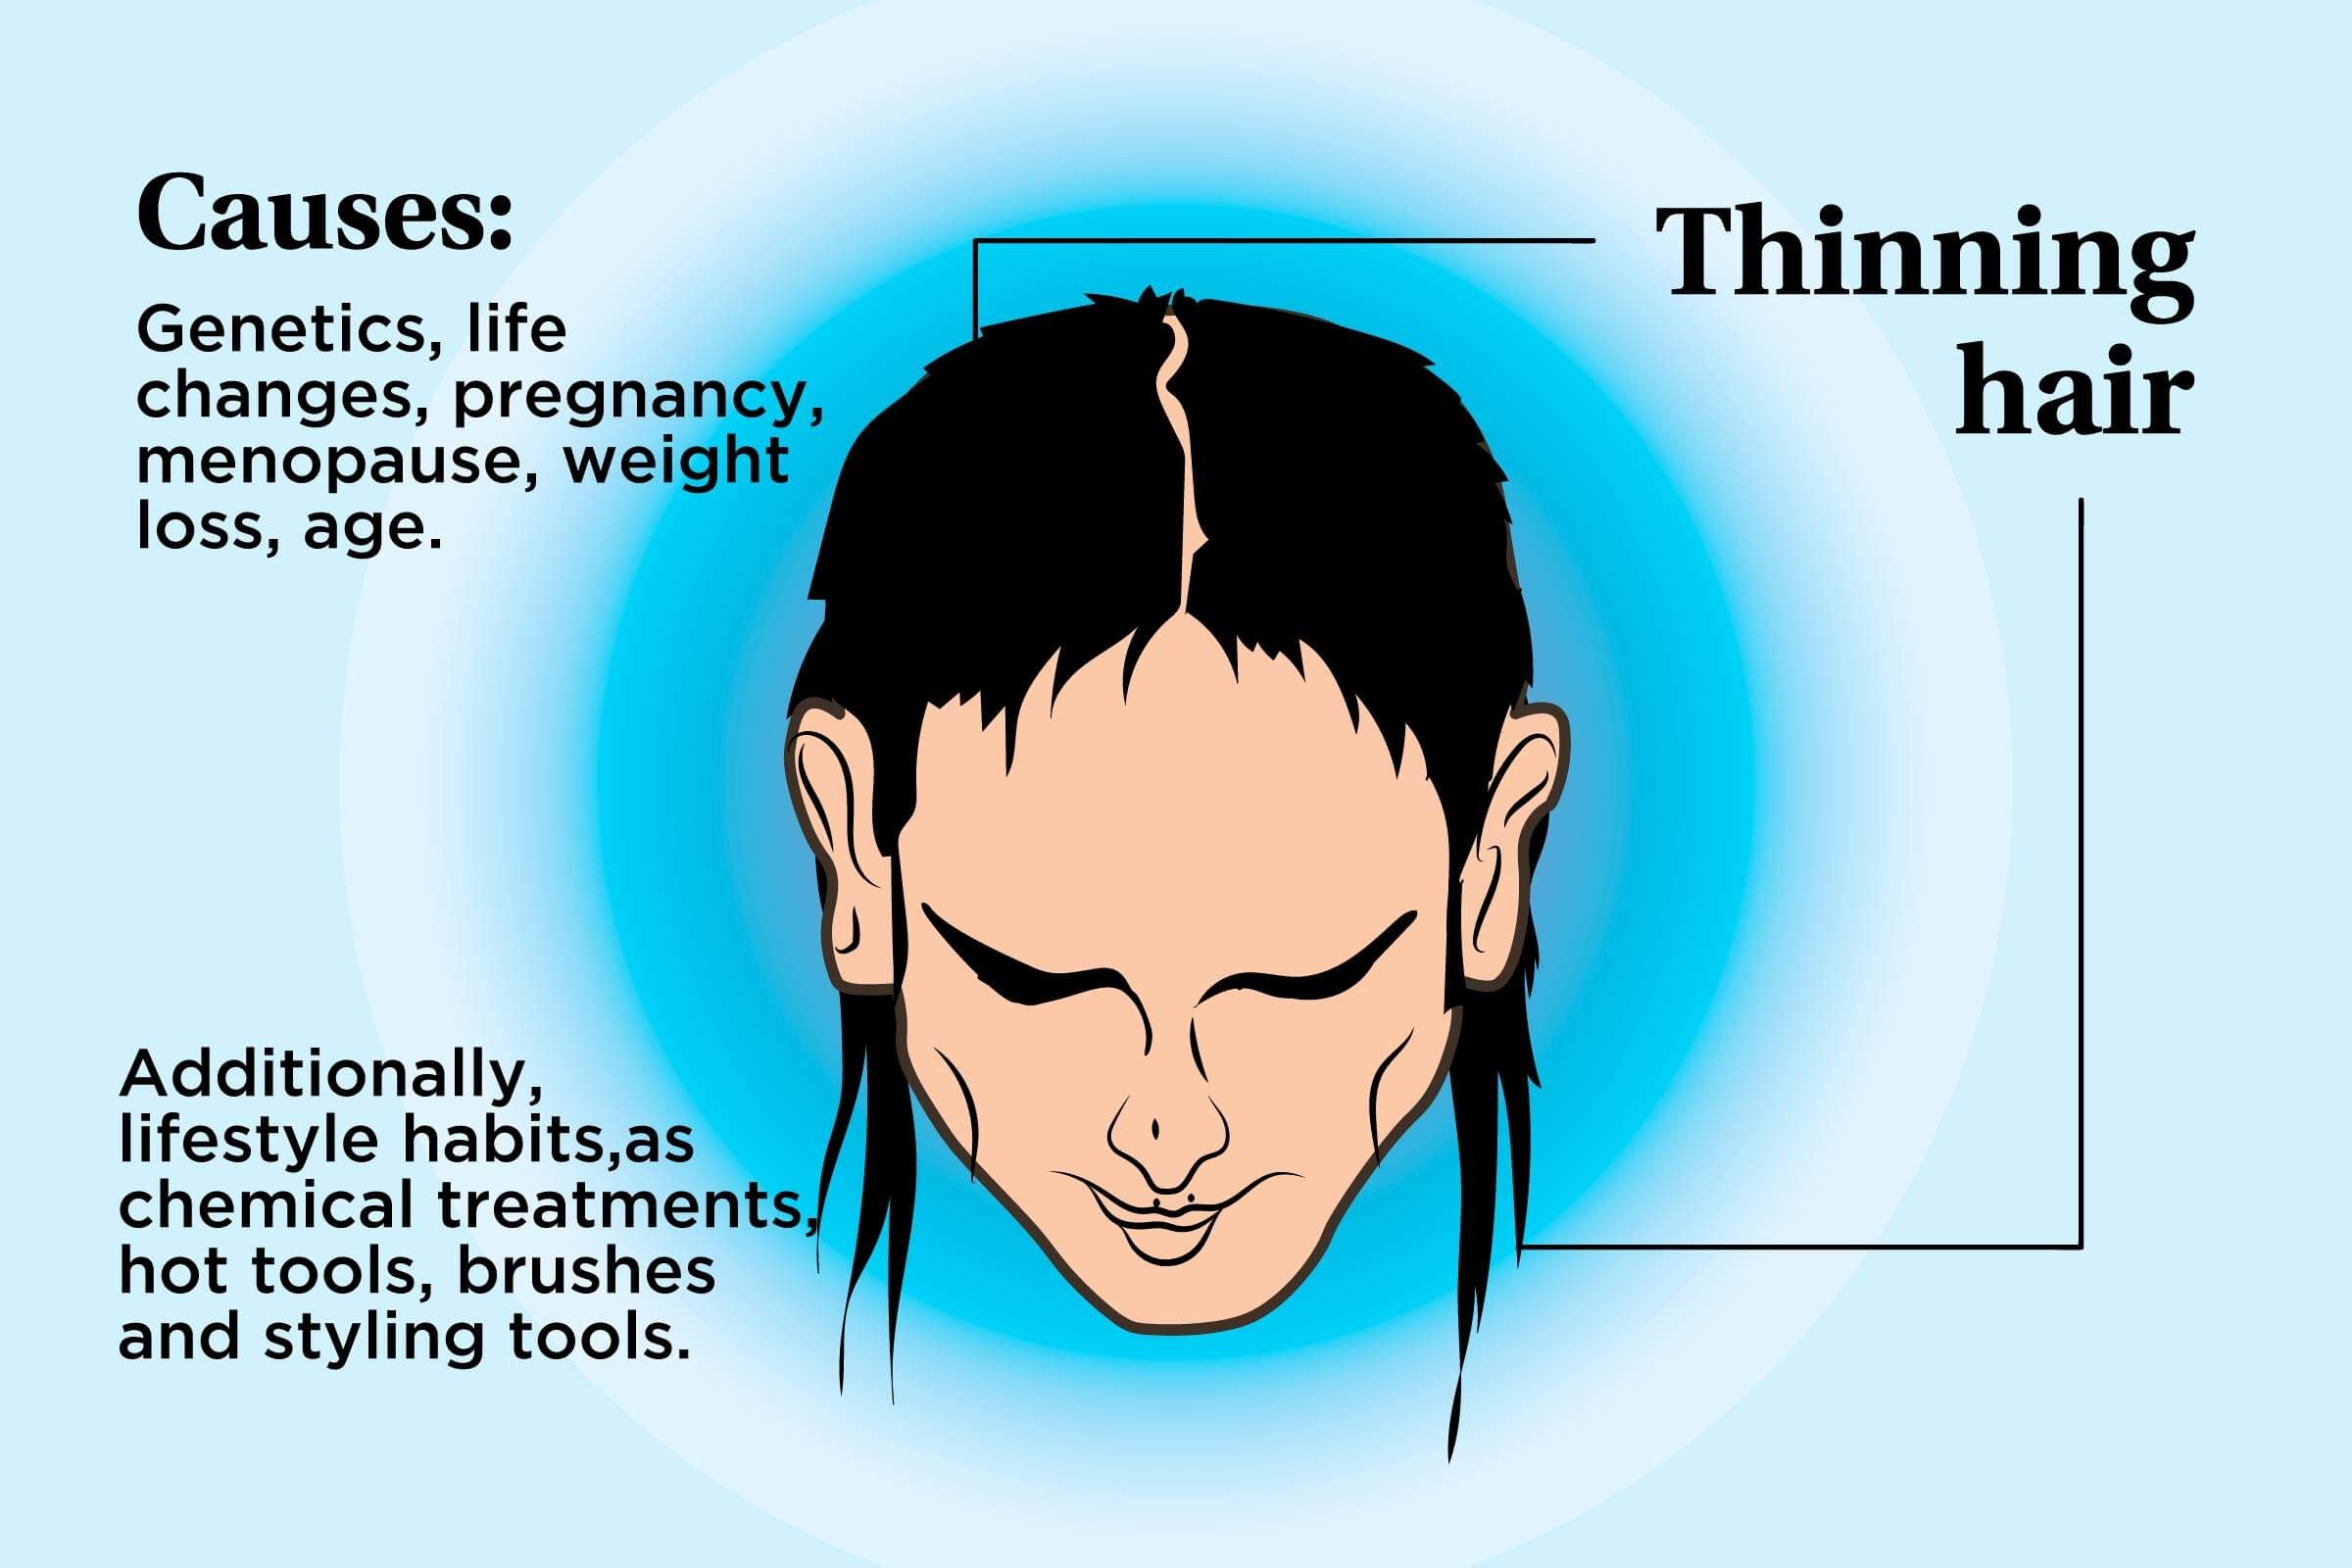 illustration of a person's scalp indicating thinning